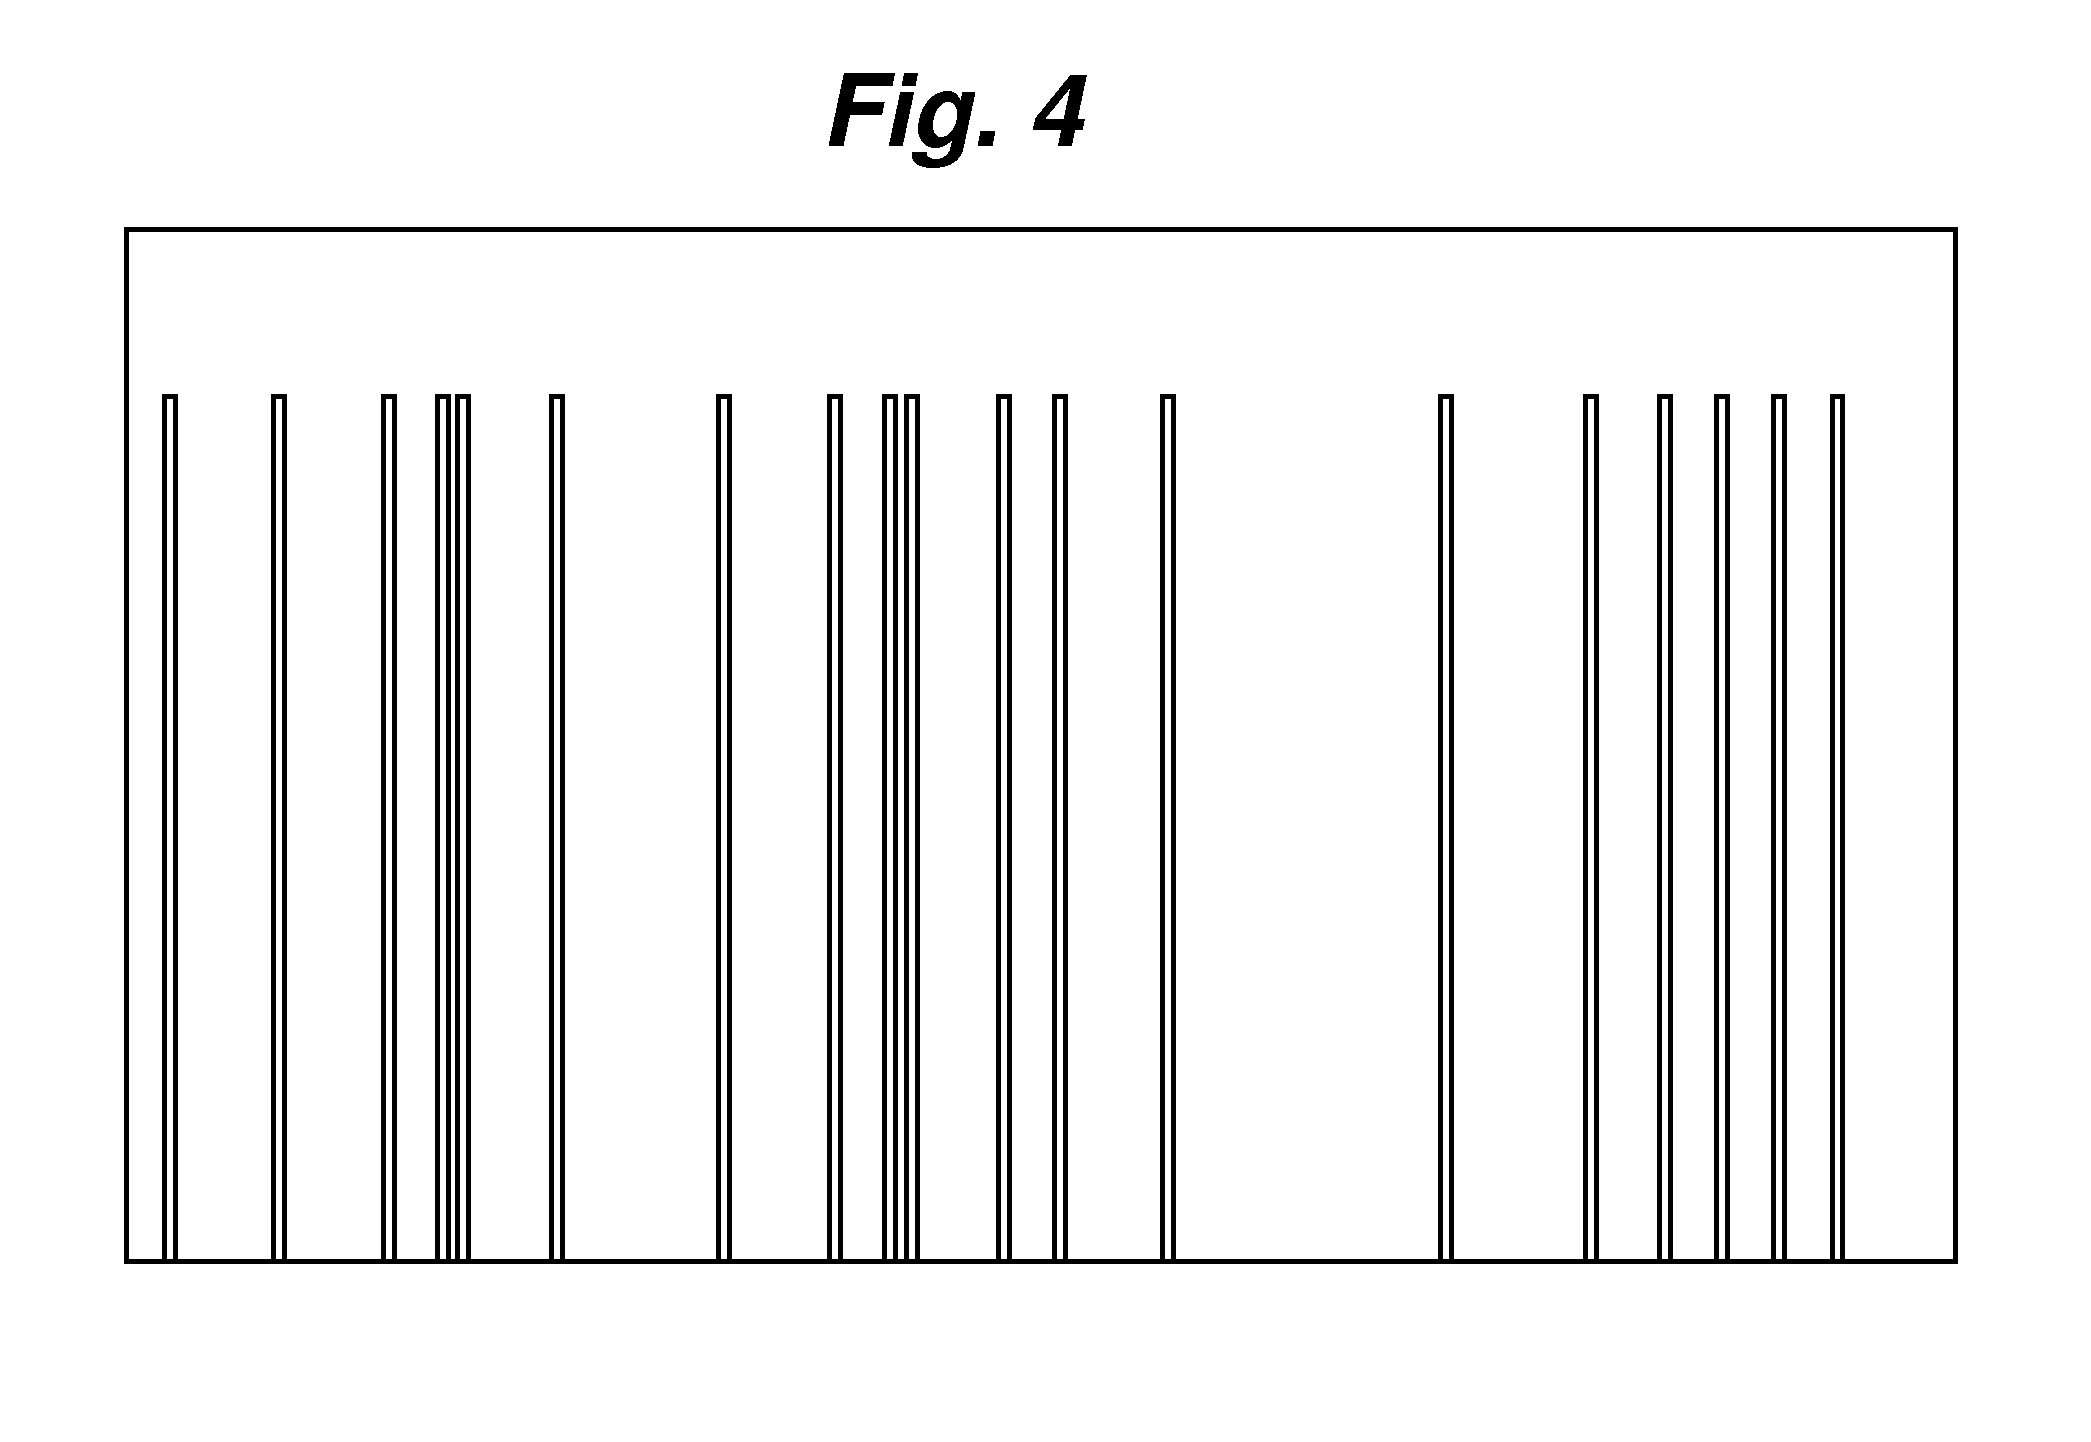 System and method for nucleotide sequence profiling for sample identification